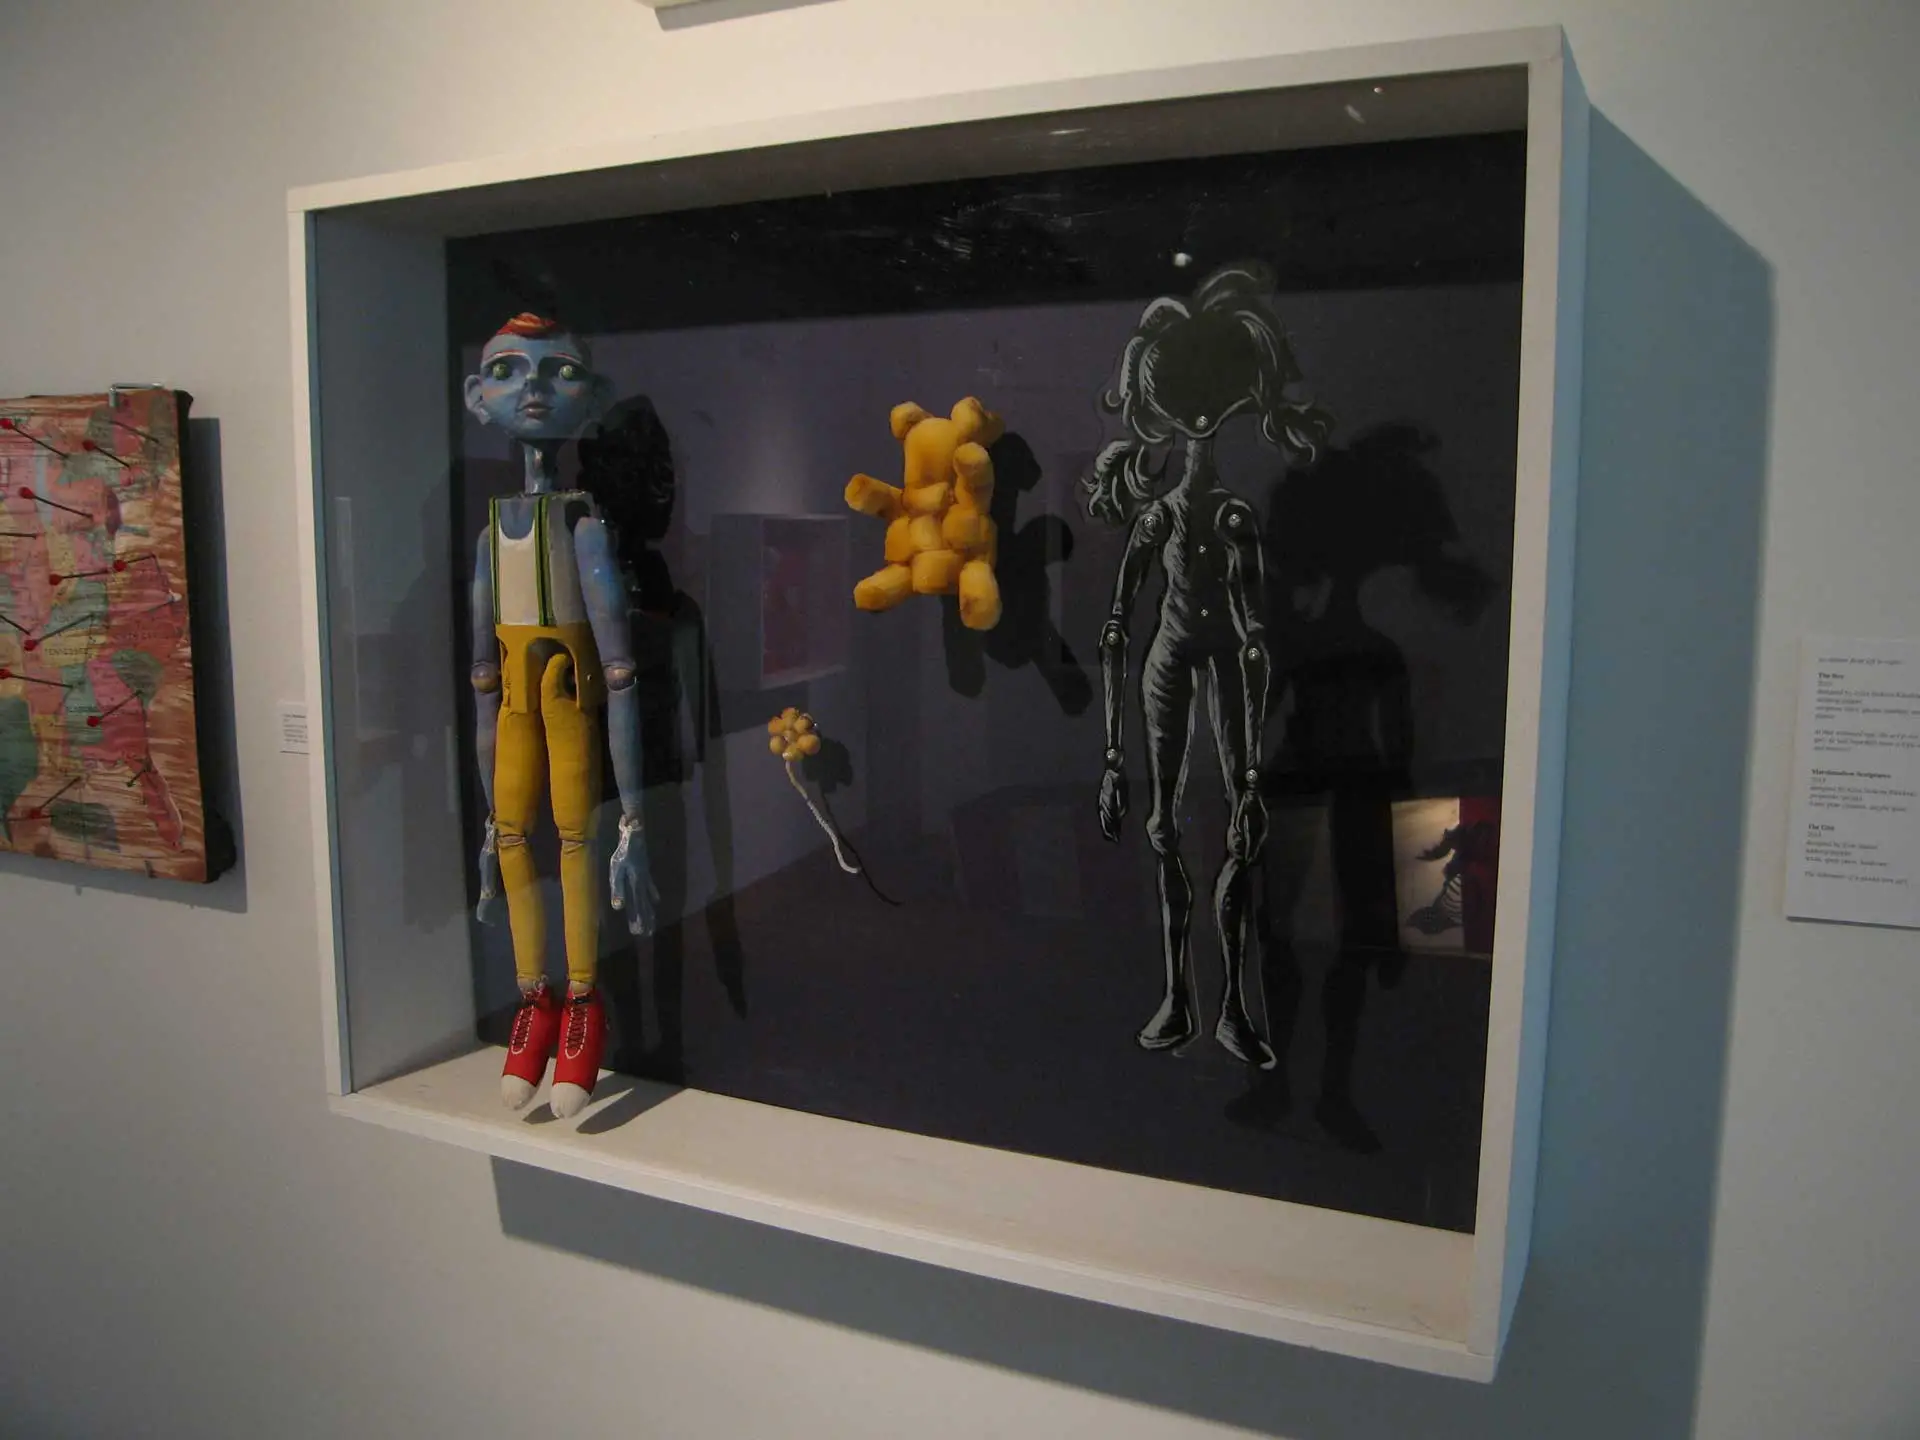 Installation view, "Alive! Revealing the Art of Puppetry", Commons Art Gallery, photo: Matthew Borgen.